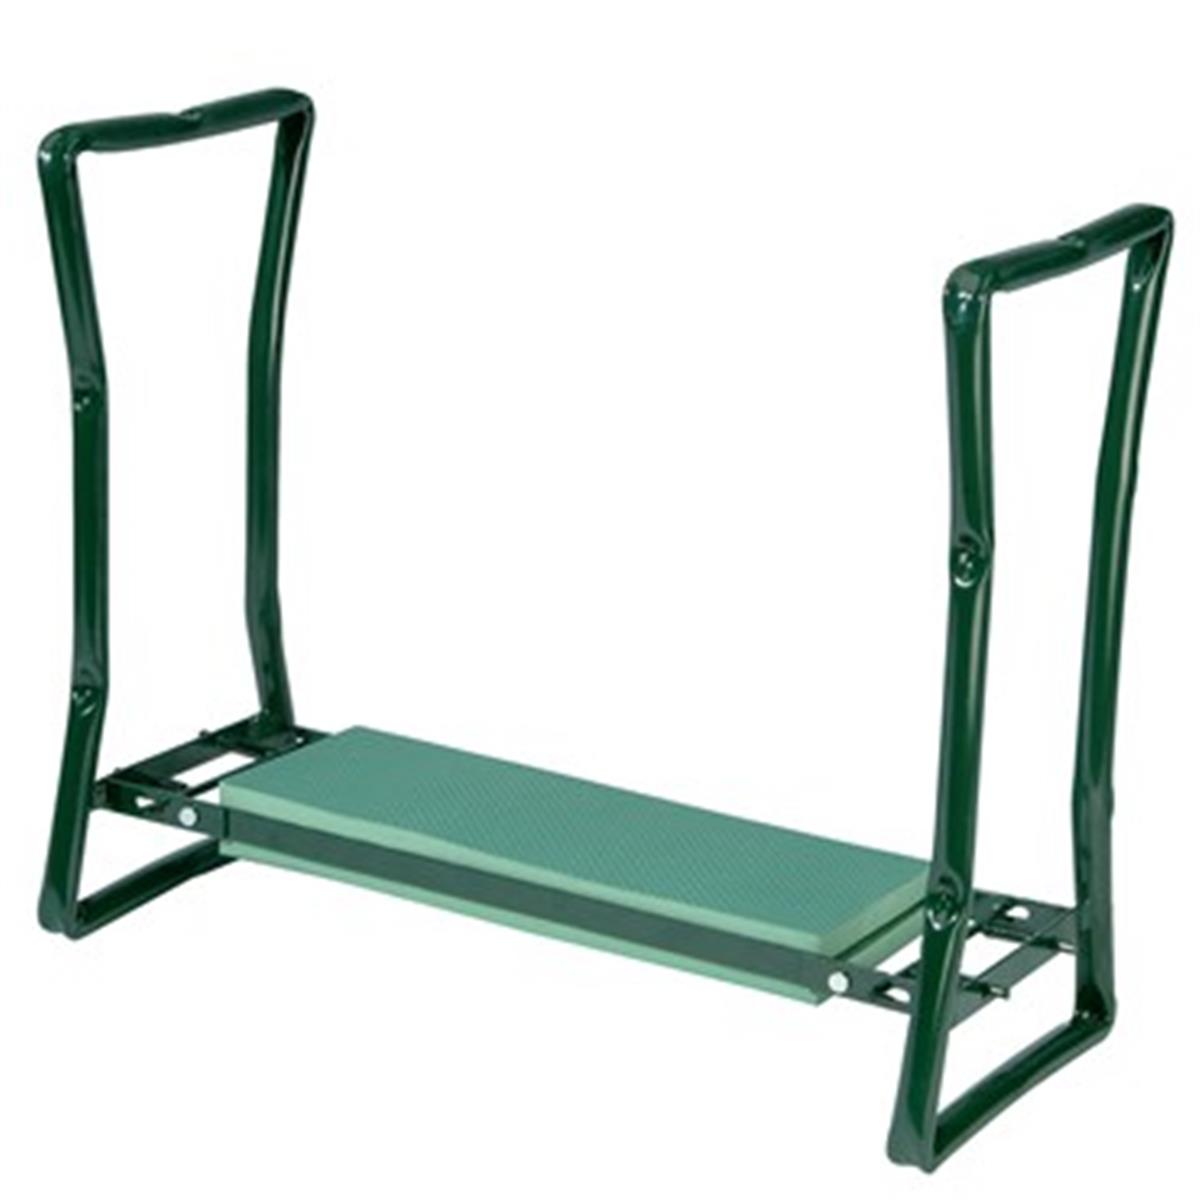 Picture of Bosmere Products BOSN470 250 lbs Bosmere Folding Kneeler Seat